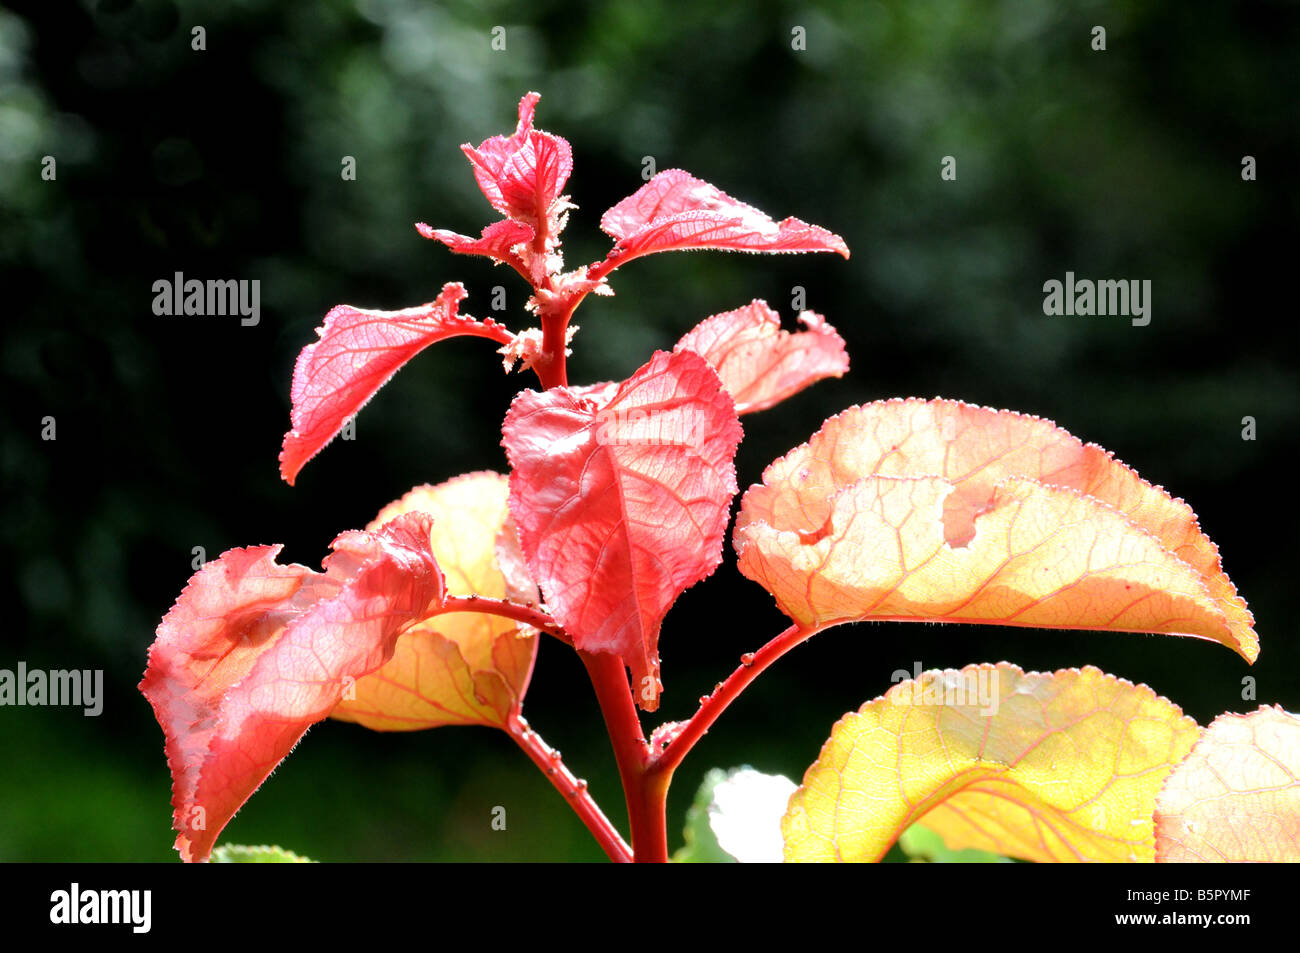 New Tender Apricot Leaves Stock Photo